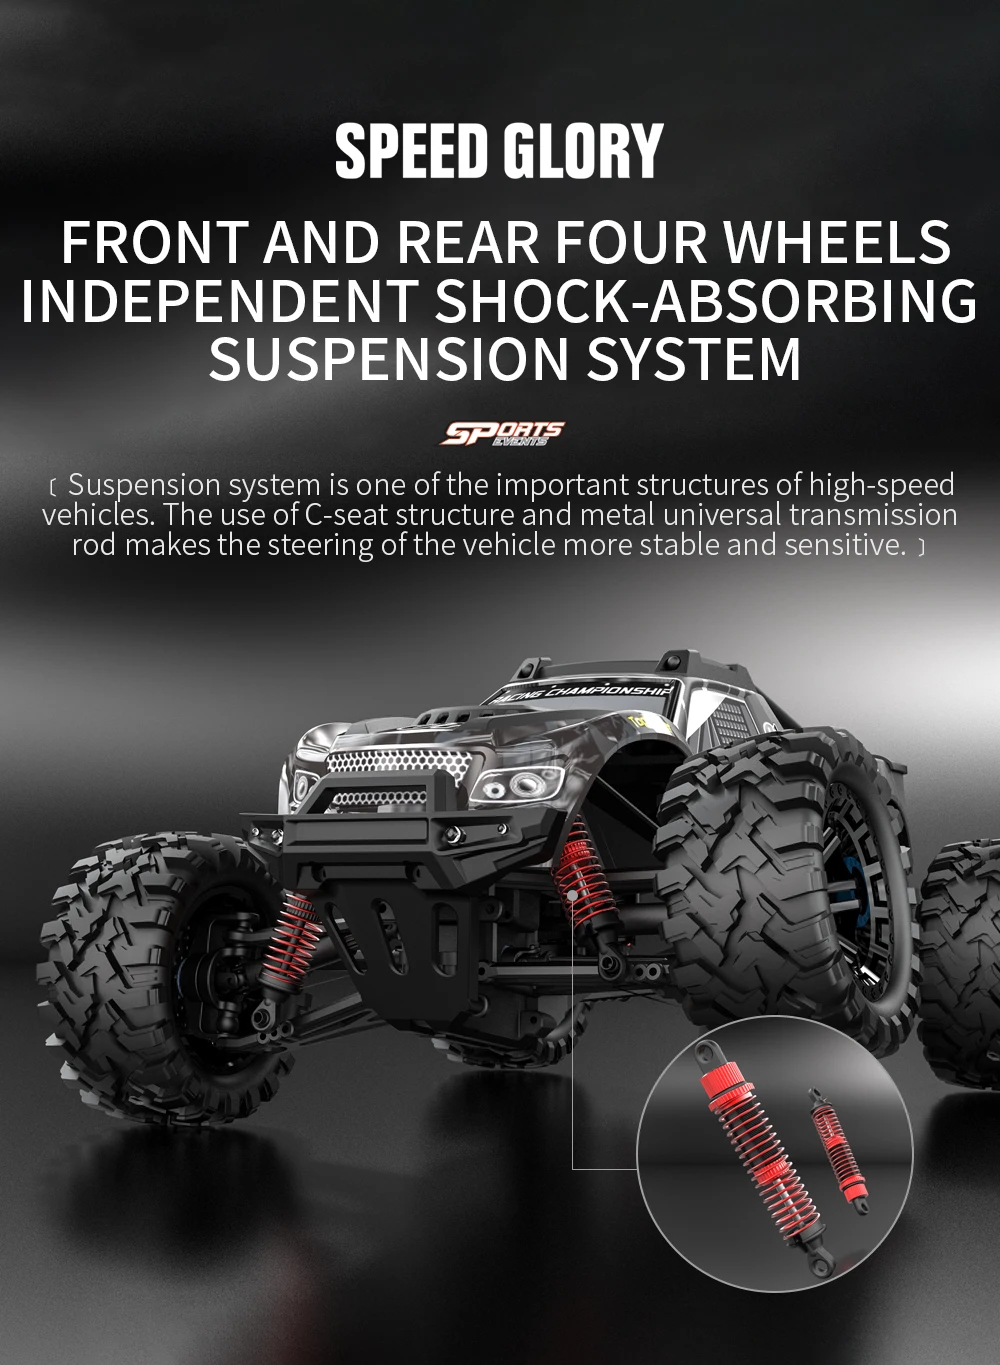 HOSHI KF10 RC CAR 1/10 Scale Truck 45KM/H High-Speed CAR Off-Road Vehicle high speed electric Climbing Vehicle Remote Control